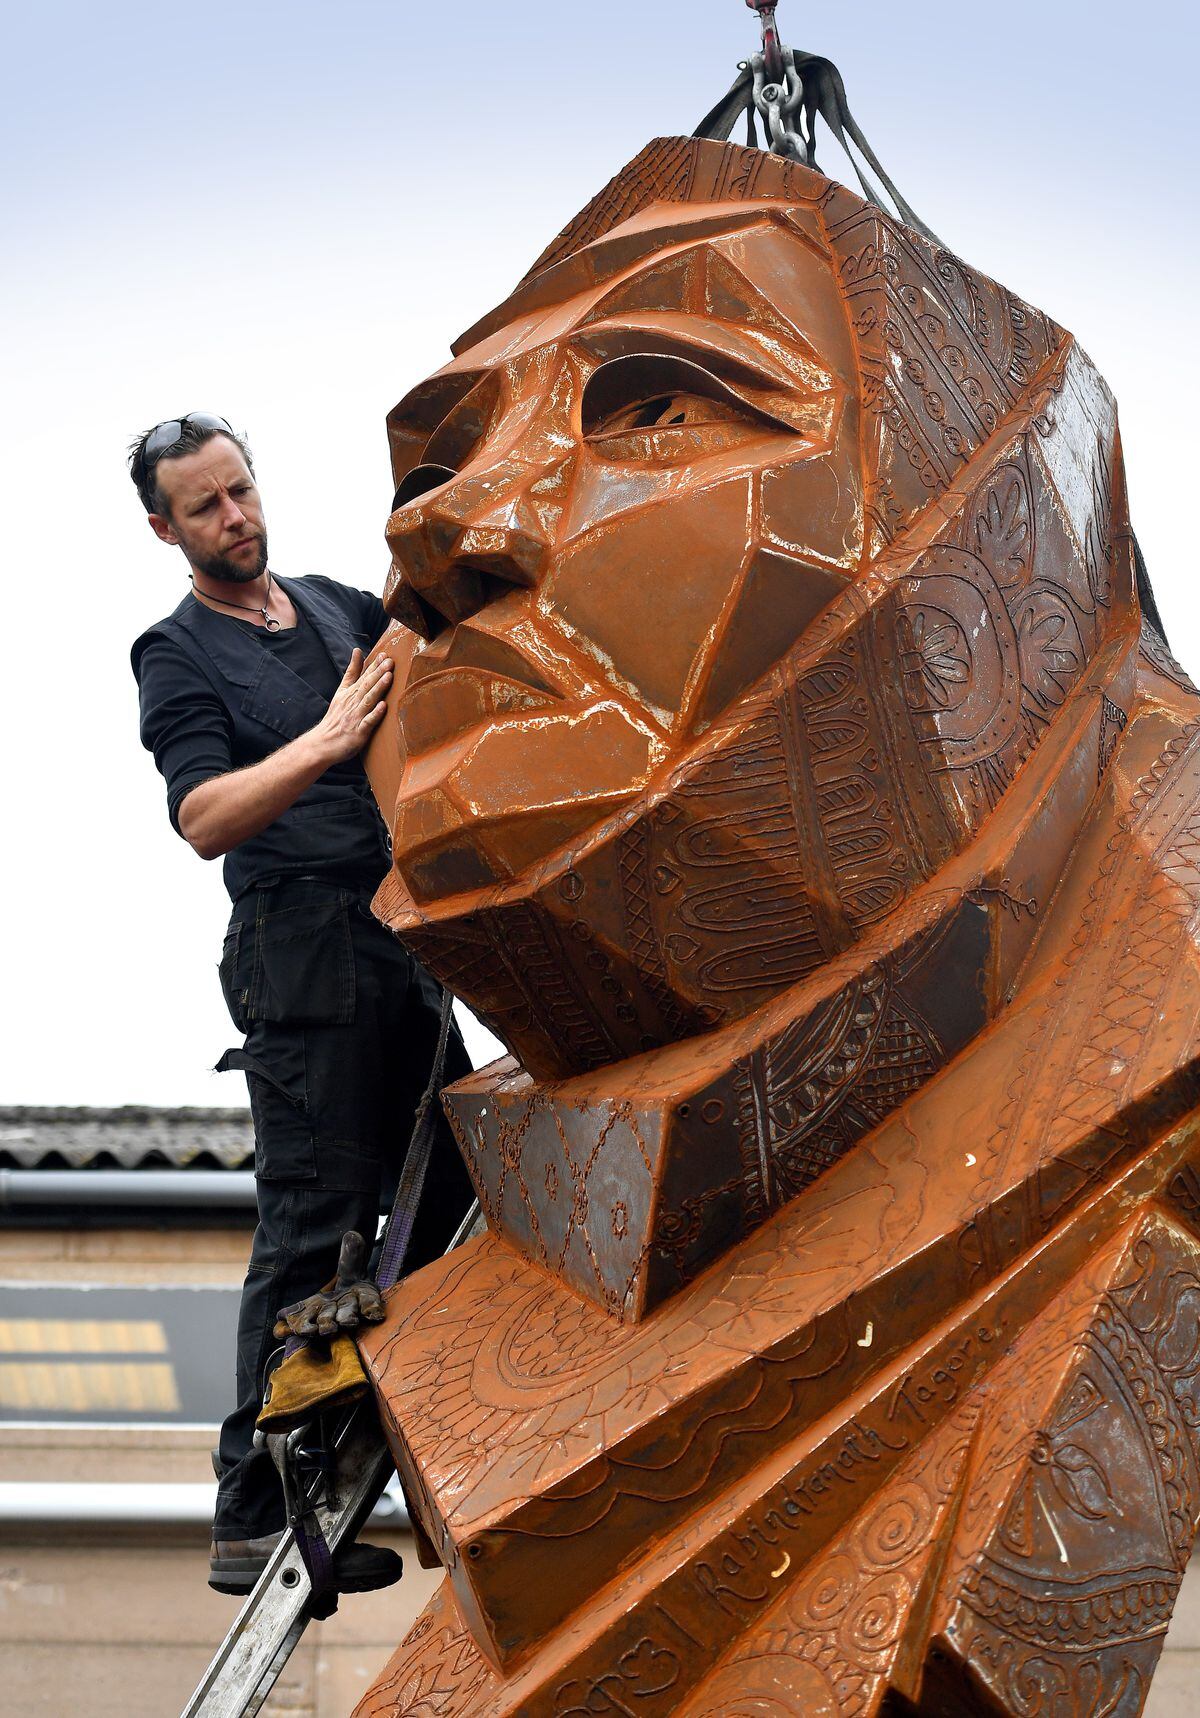 Metal artist Luke Perry has created the sculpture which is destined for Smethwick